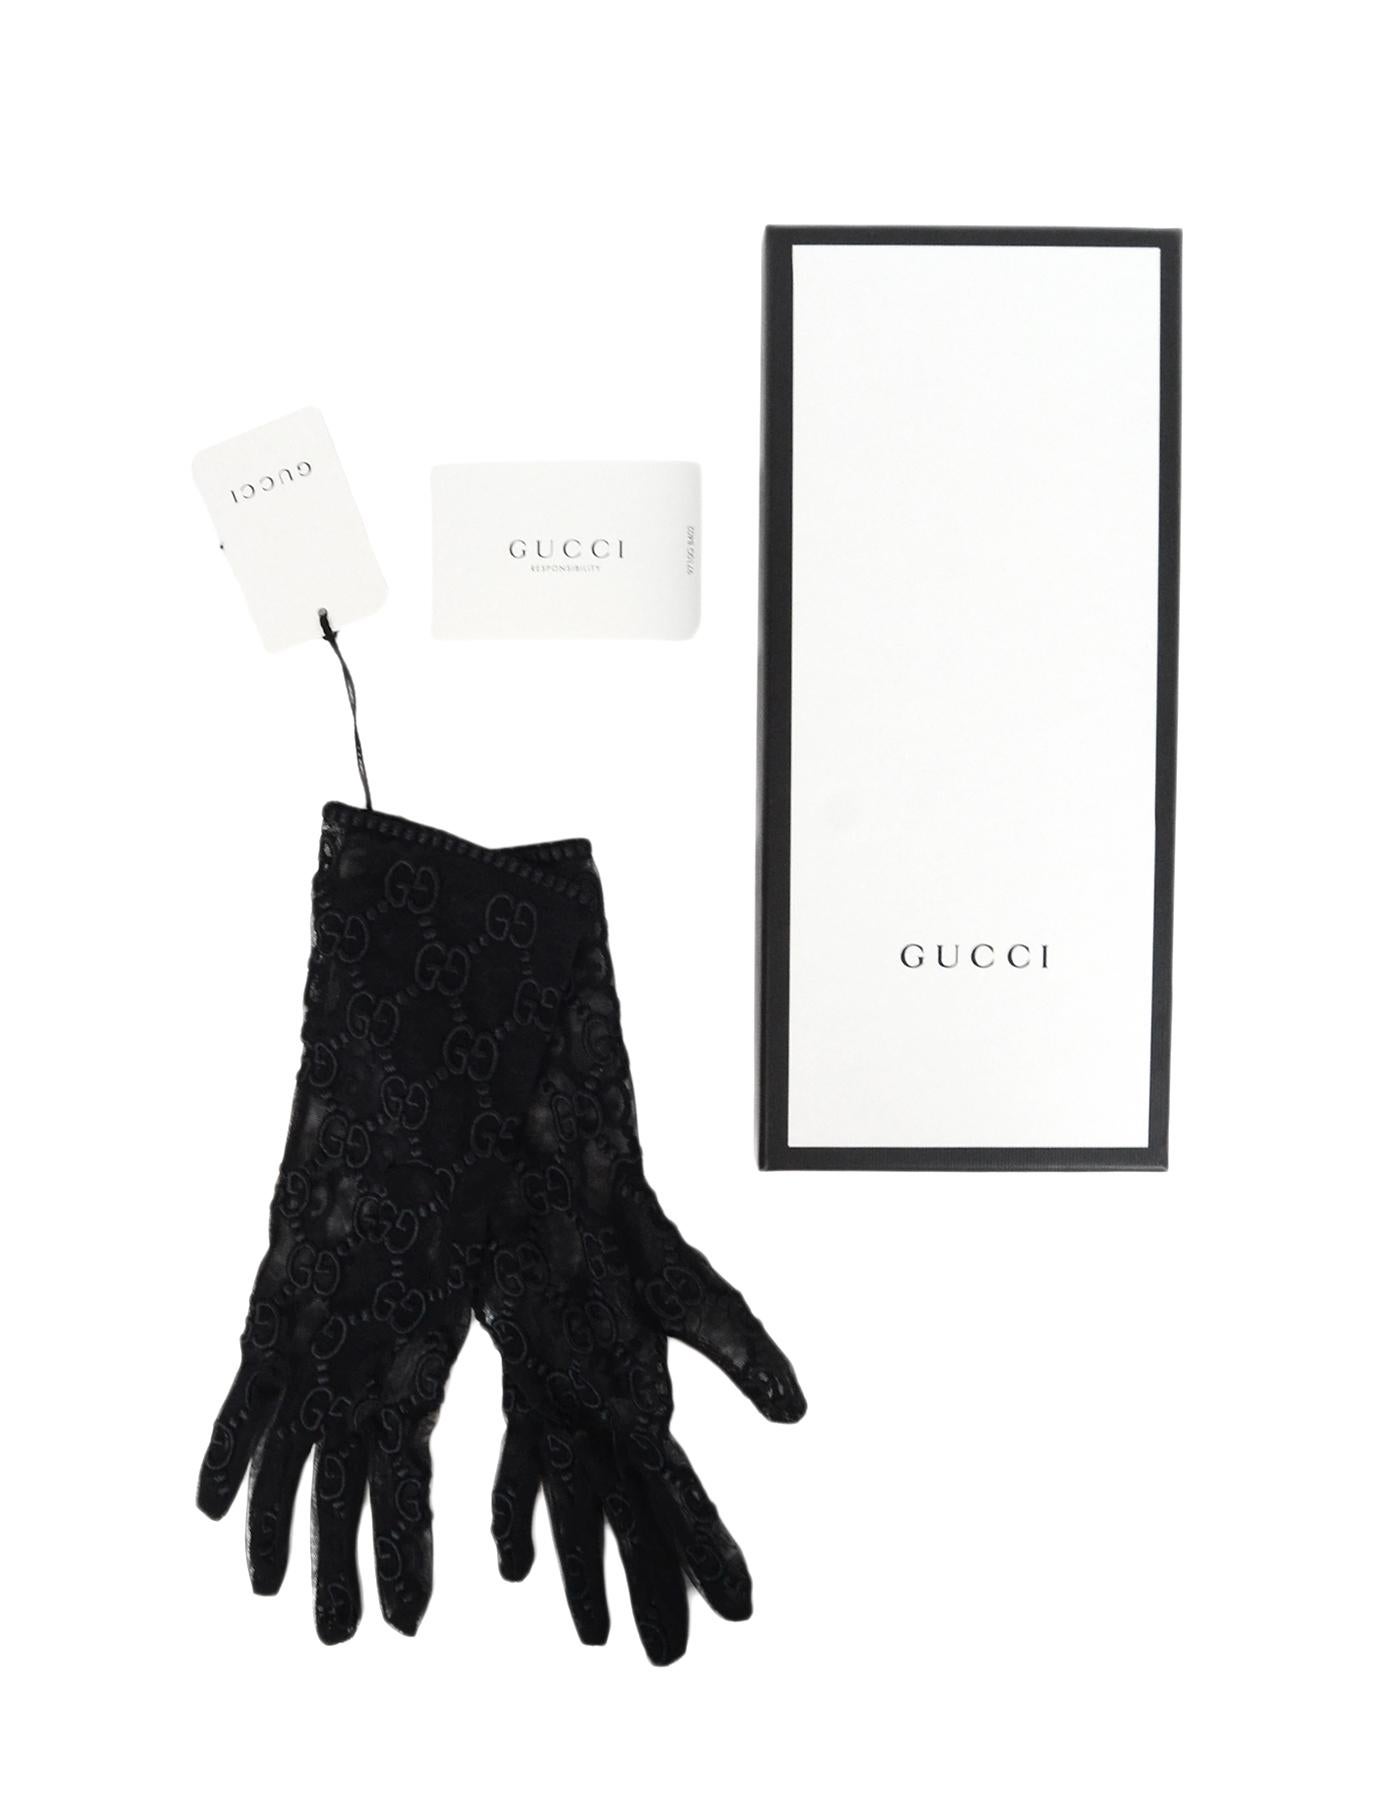 Gucci NWT Black Tulle Gloves W/ GG Monogram Motif Sz 8.5 (L) in Box

Made In: Italy
Color: Black
Materials: Tulle
Closure/Opening: Slide on
Overall Condition: New with tags
Estimated Retail: $690 + tax
Includes:  Gucci box, tags and care